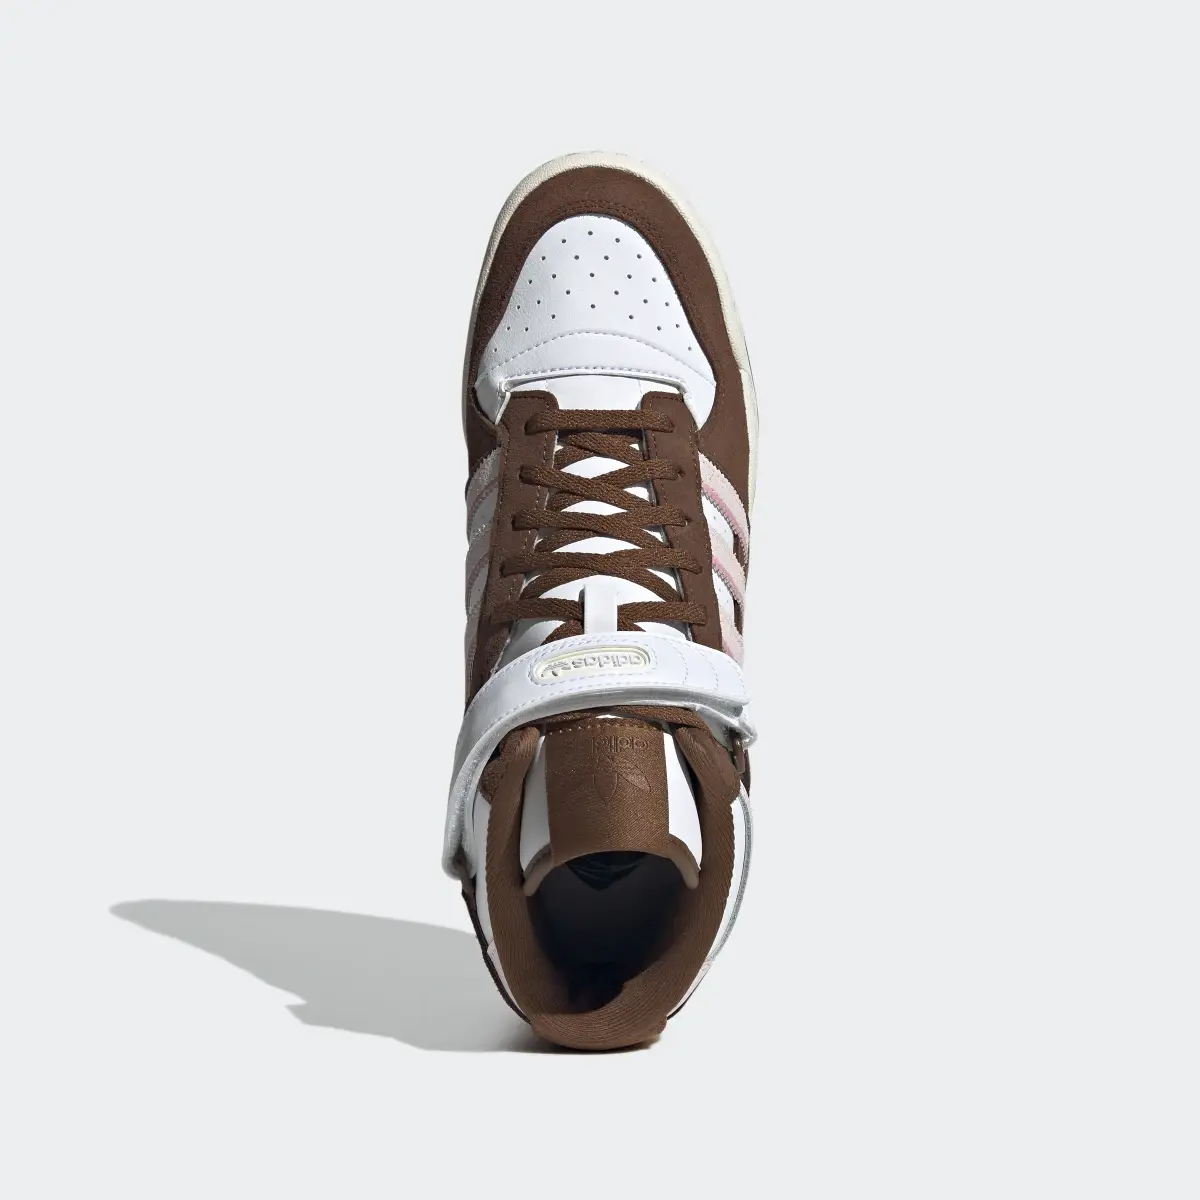 Adidas Forum Mid Shoes. 3